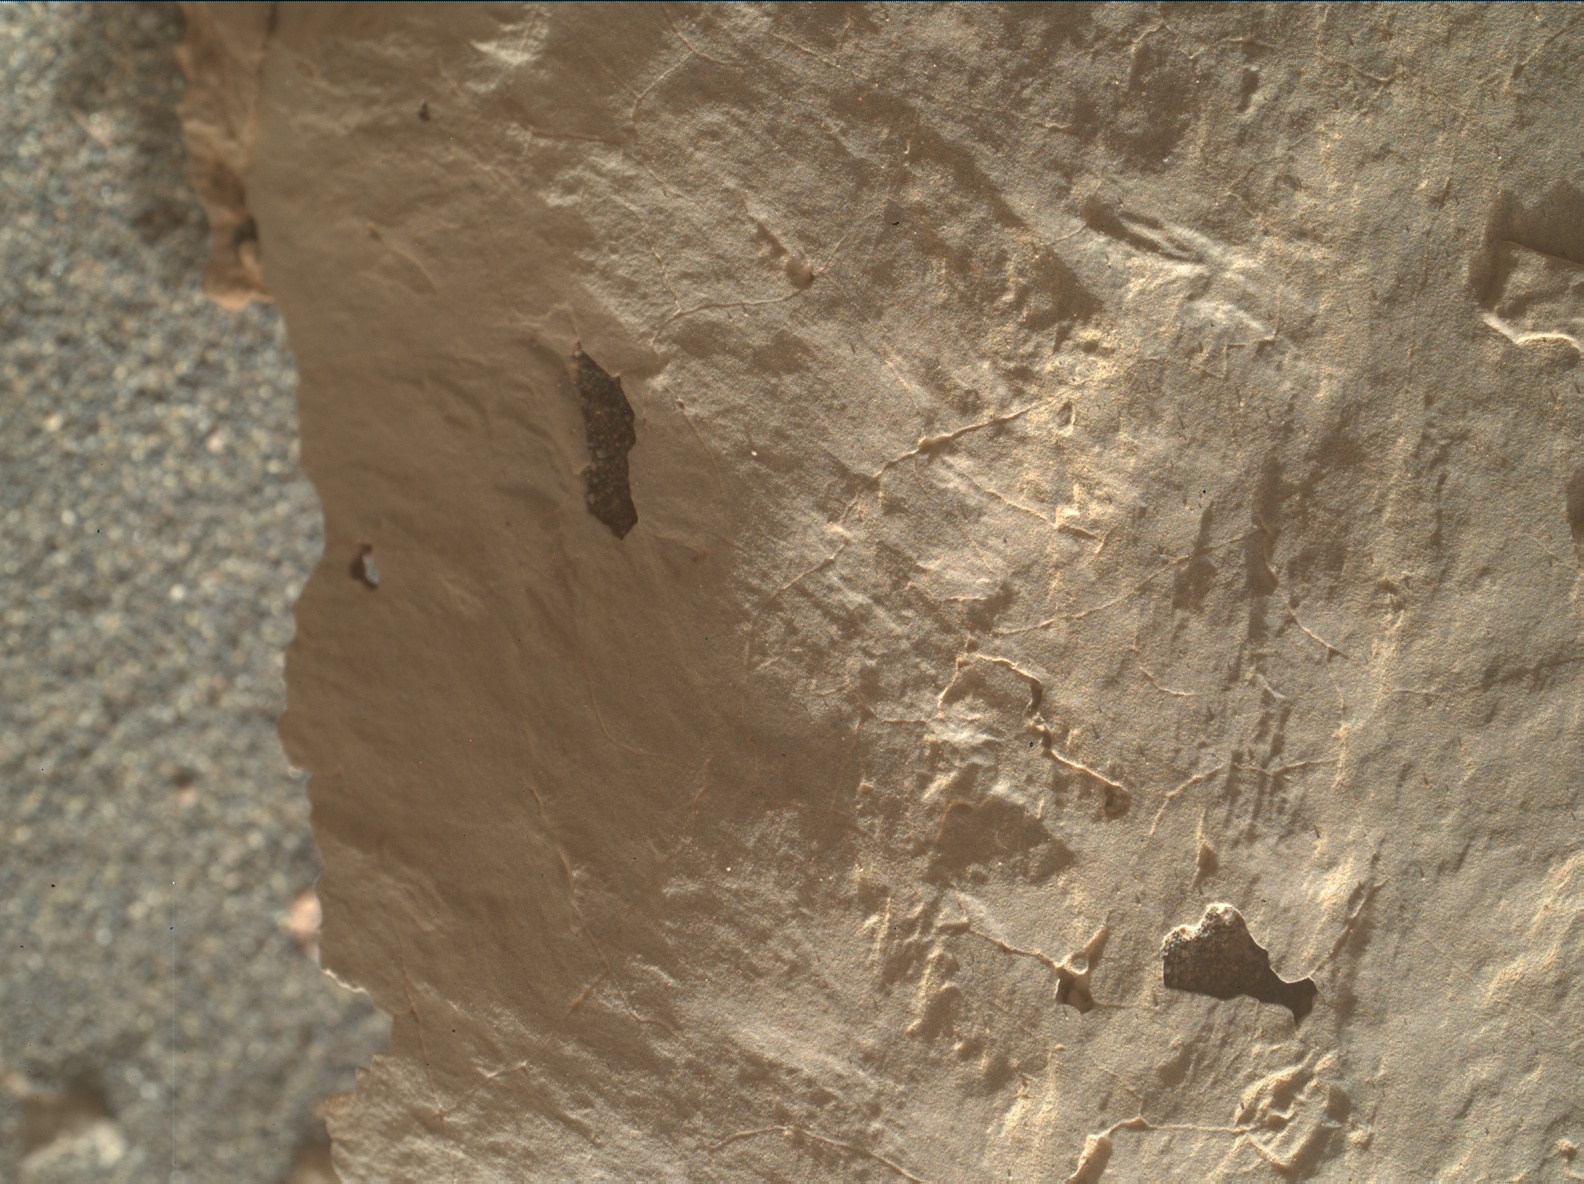 Nasa's Mars rover Curiosity acquired this image using its Mars Hand Lens Imager (MAHLI) on Sol 3142